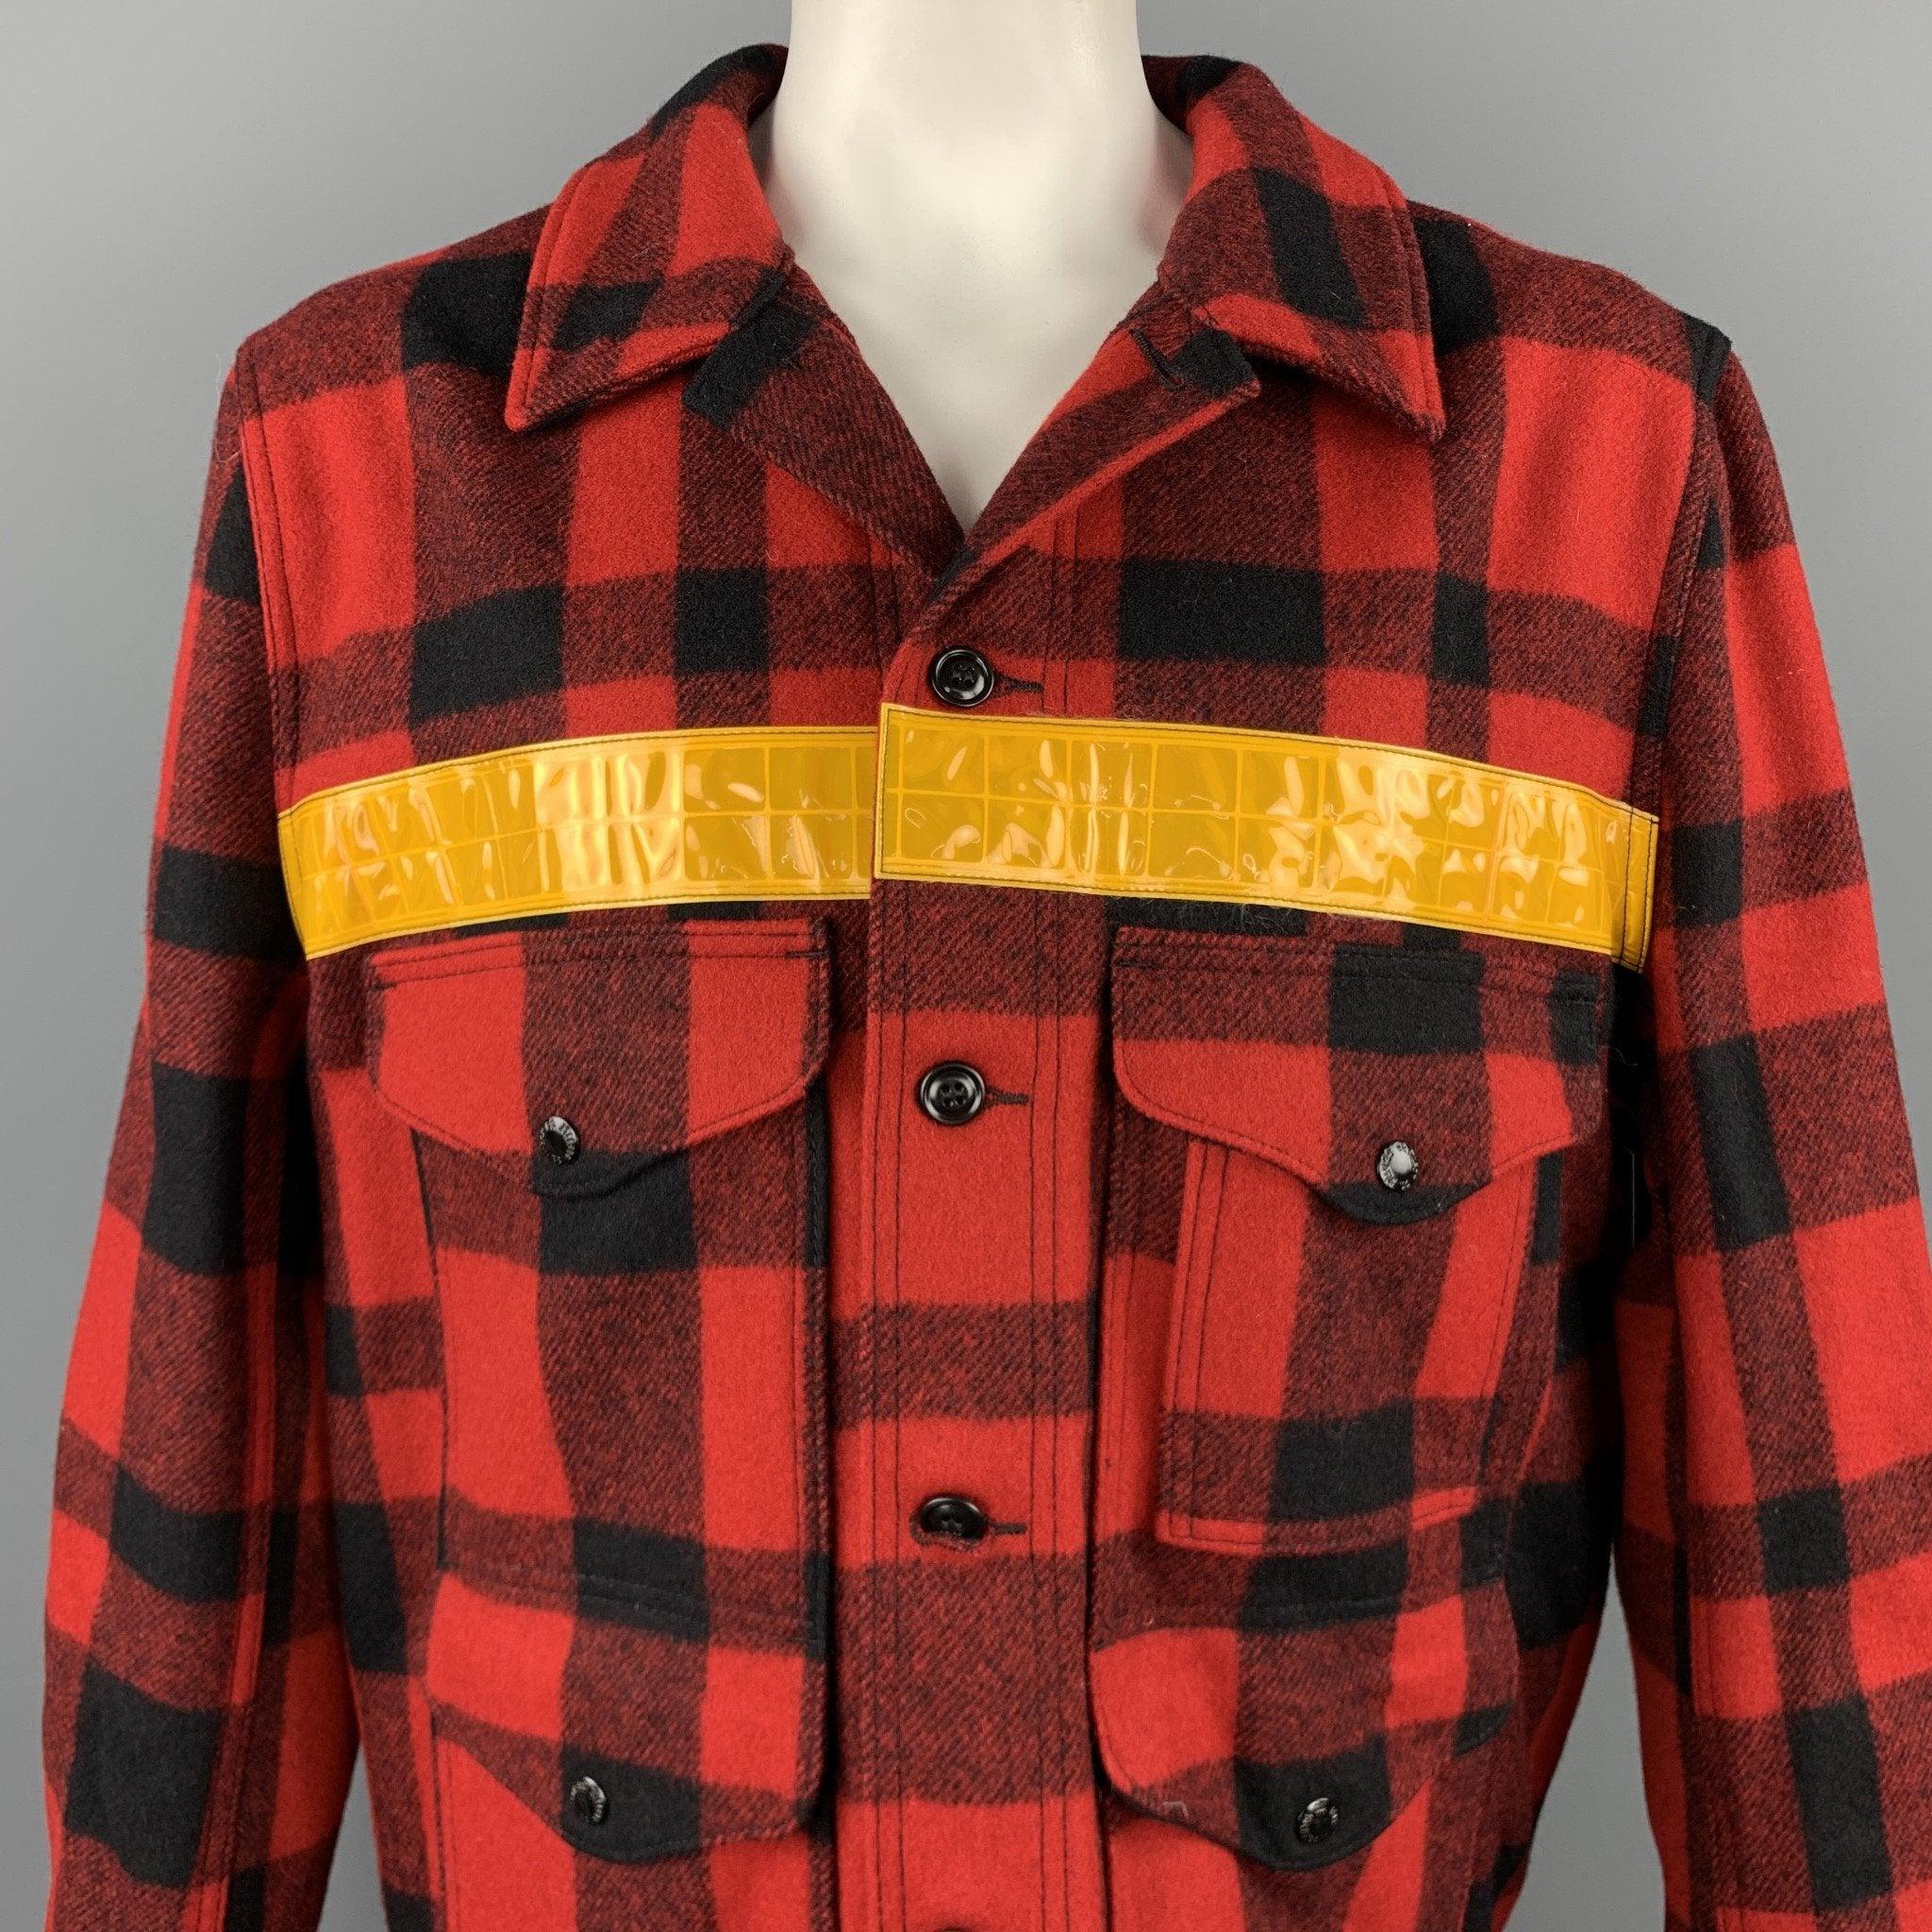 JUNYA WATANABE MAN x FILSON jacket comes in a red & black buffalo plaid wool with a yellow reflective stripe detail featuring front patch pockets, leather elbow patches, nylon back, and a buttoned closure. 
Made in Japan / USA.Excellent
Pre-Owned